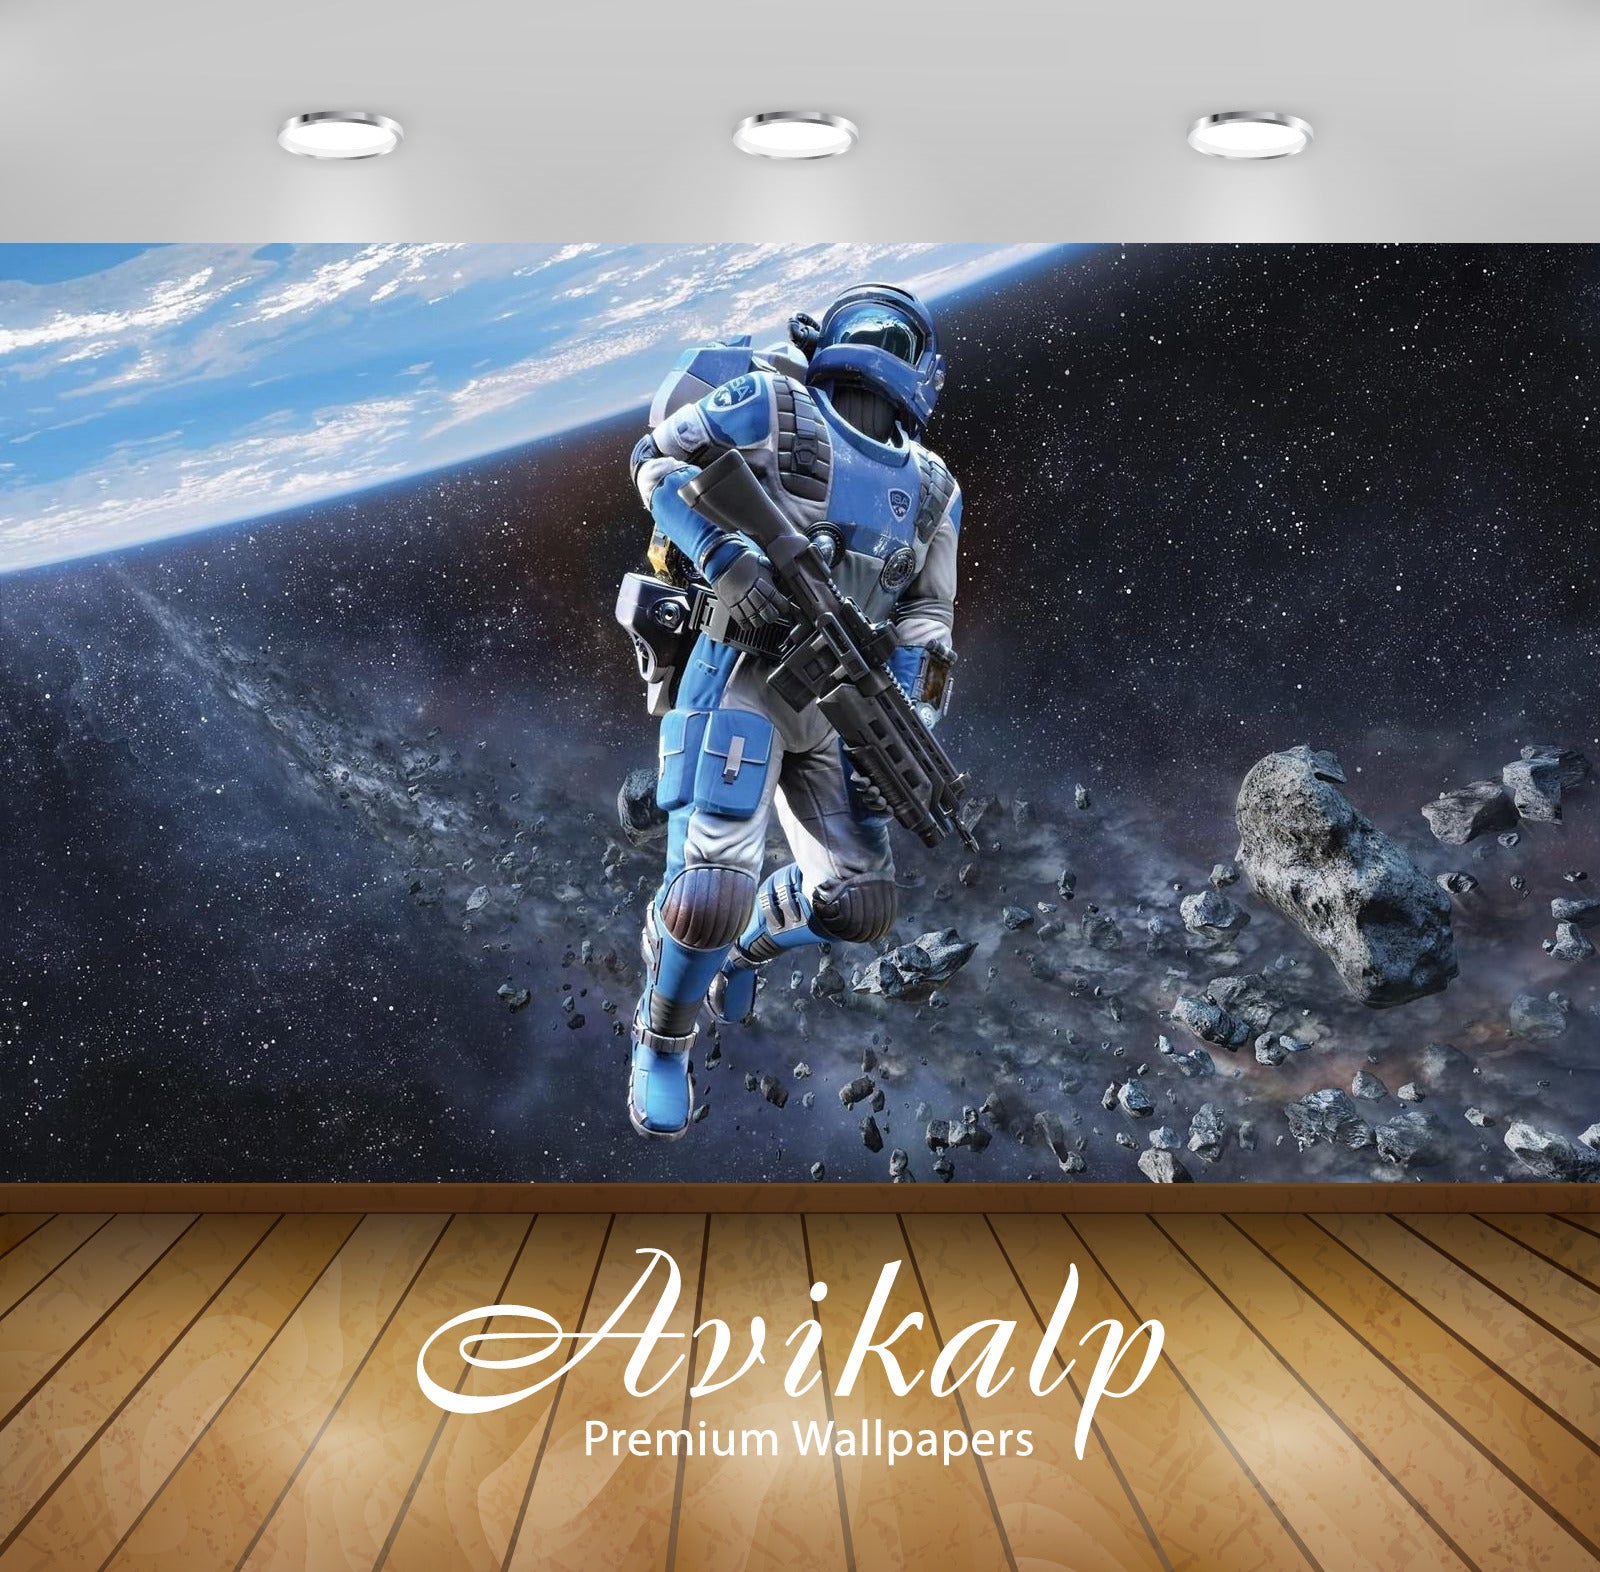 Avikalp Exclusive Awi2524 Cosmic Soldier Asteroid Earth Full HD Wallpapers for Living room, Hall, Ki